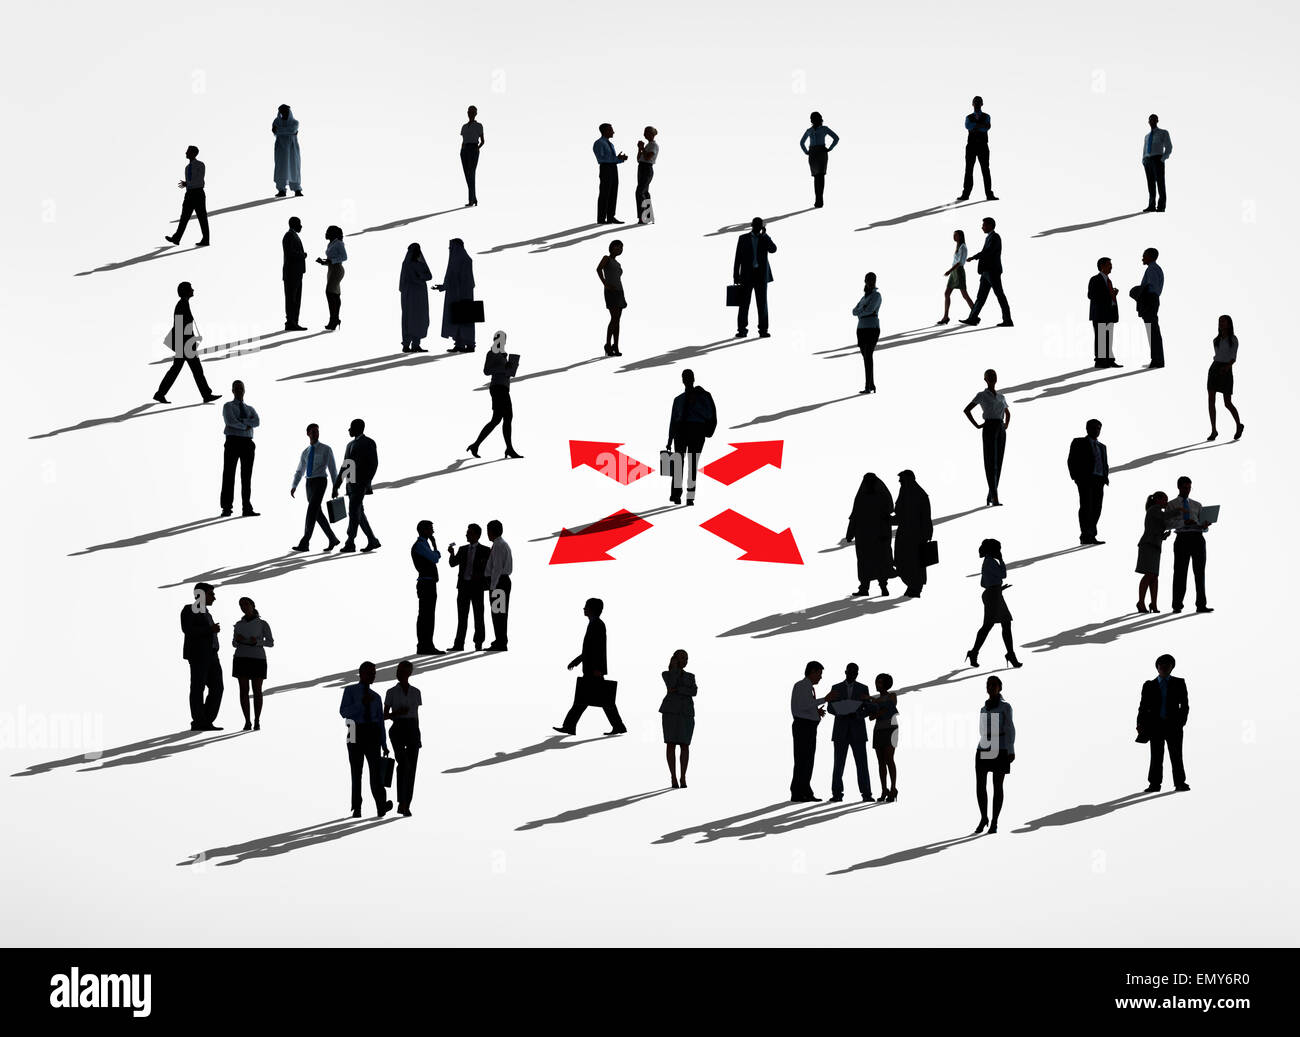 Lone Silhouettes Of A Business Man In A Center Amongst Group Of Silhouettes Of Business People. Stock Photo